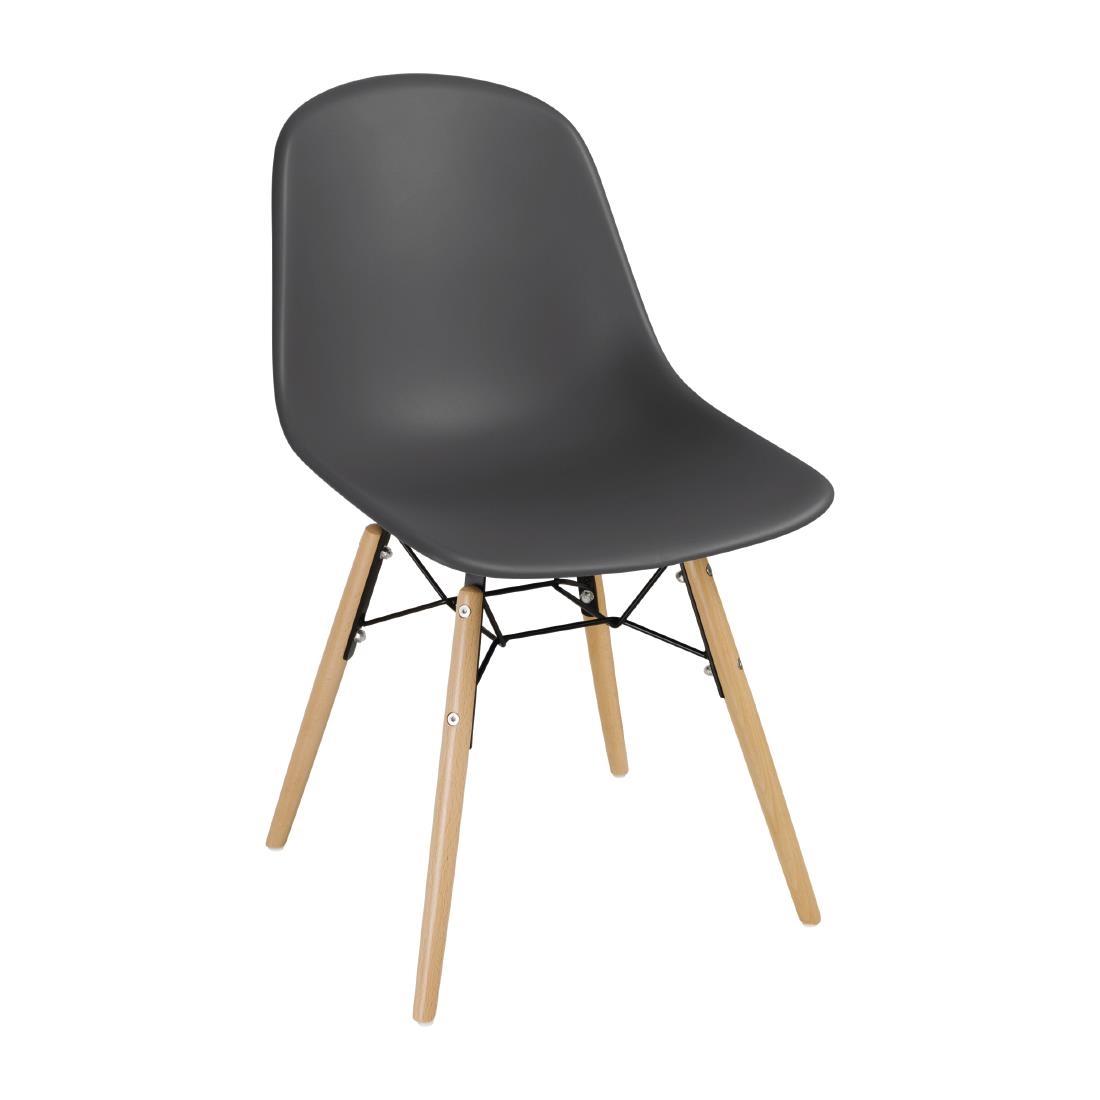 Bolero Arlo PP Moulded Side Chair Charcoal with Spindle Legs (Pack of 2) - DM841  - 1